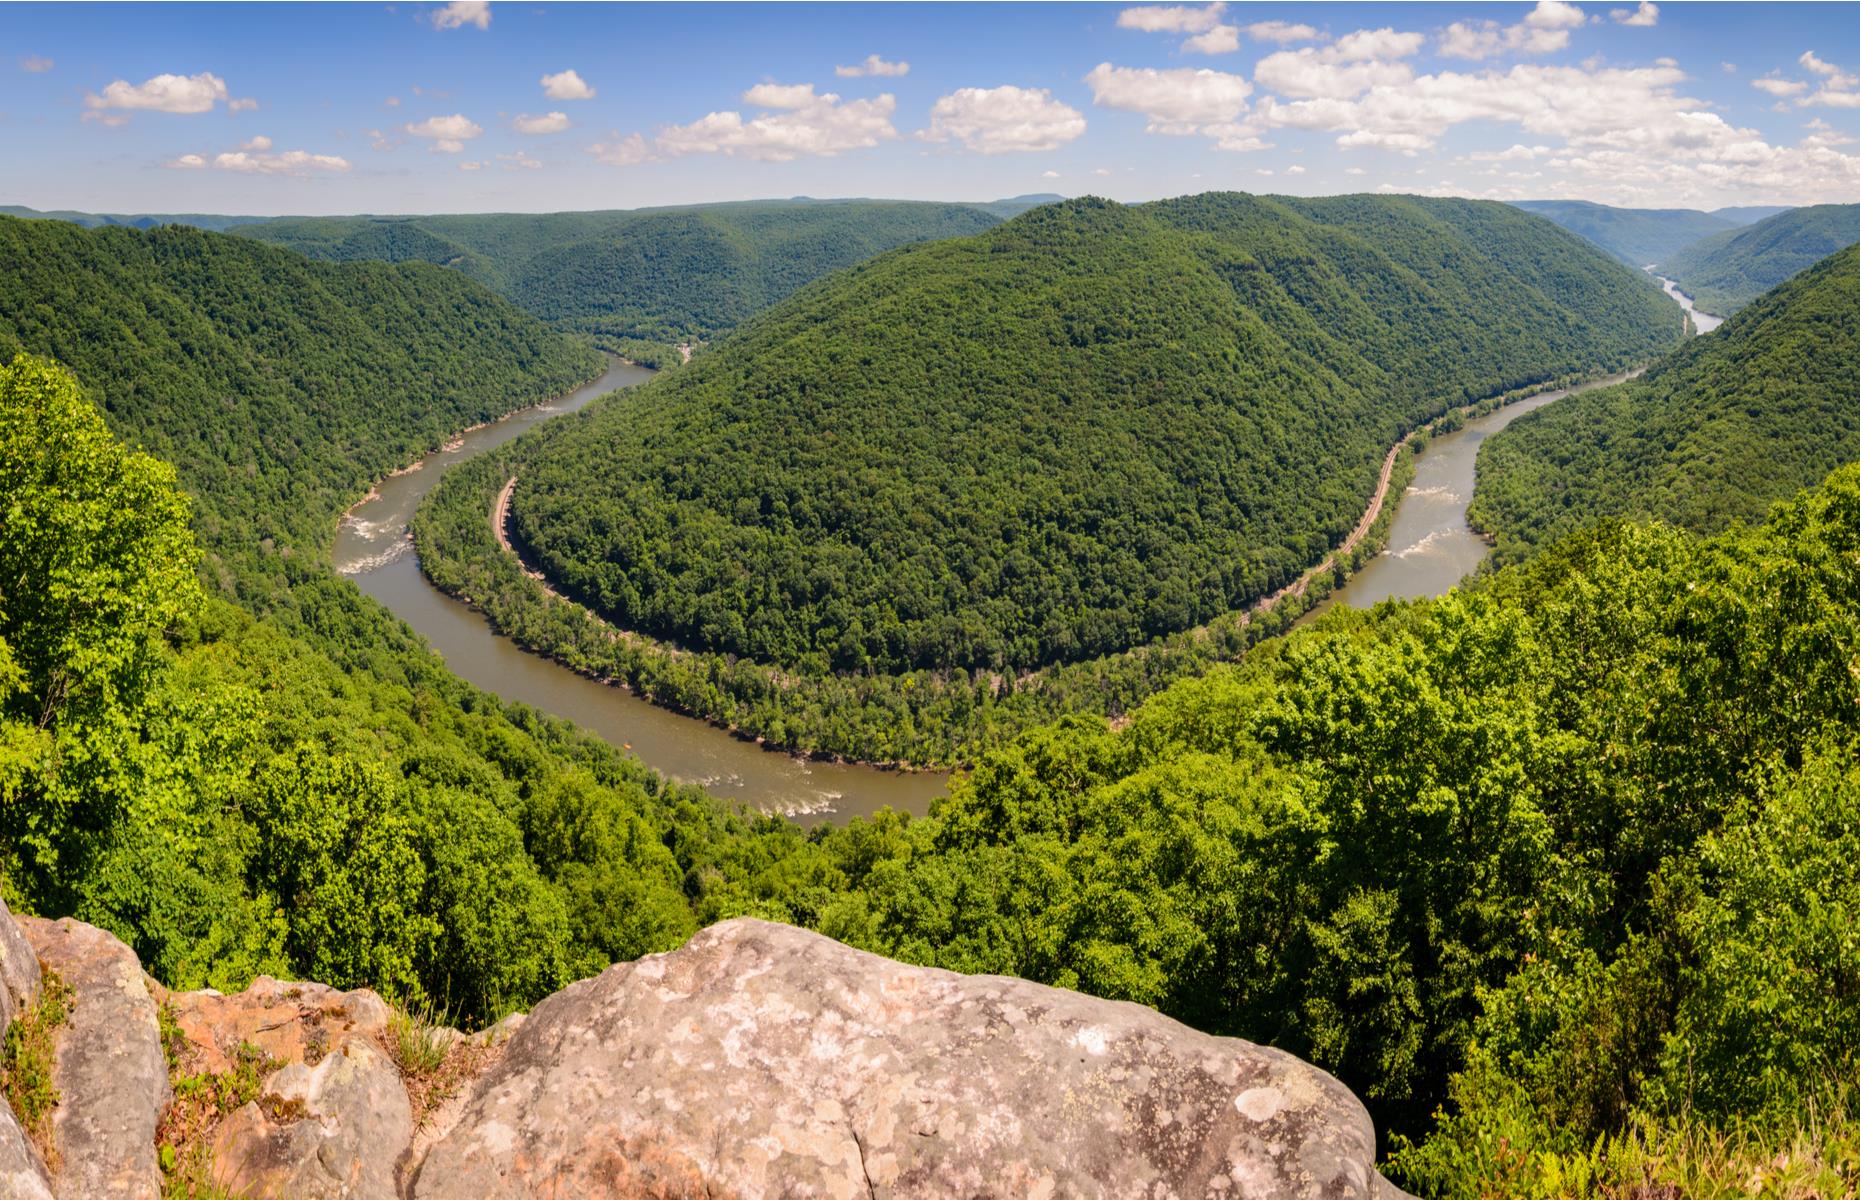 <p><a href="https://www.nps.gov/neri/index.htm">New River Gorge</a> was designated a national park in late 2020 and it has long been a favorite spot thanks to those incredible views over the bend in the New River, flanked by thickly forested hills. It’s also a popular whitewater rafting destination, with the river flowing in parts through canyons. Families can explore the glorious greenery on their own or take a ranger-led tour or nature walk.</p>  <p><strong><a href="https://www.loveexploring.com/galleries/118181/your-states-most-beautiful-natural-wonder">This is your state's most beautiful natural wonder</a></strong></p>